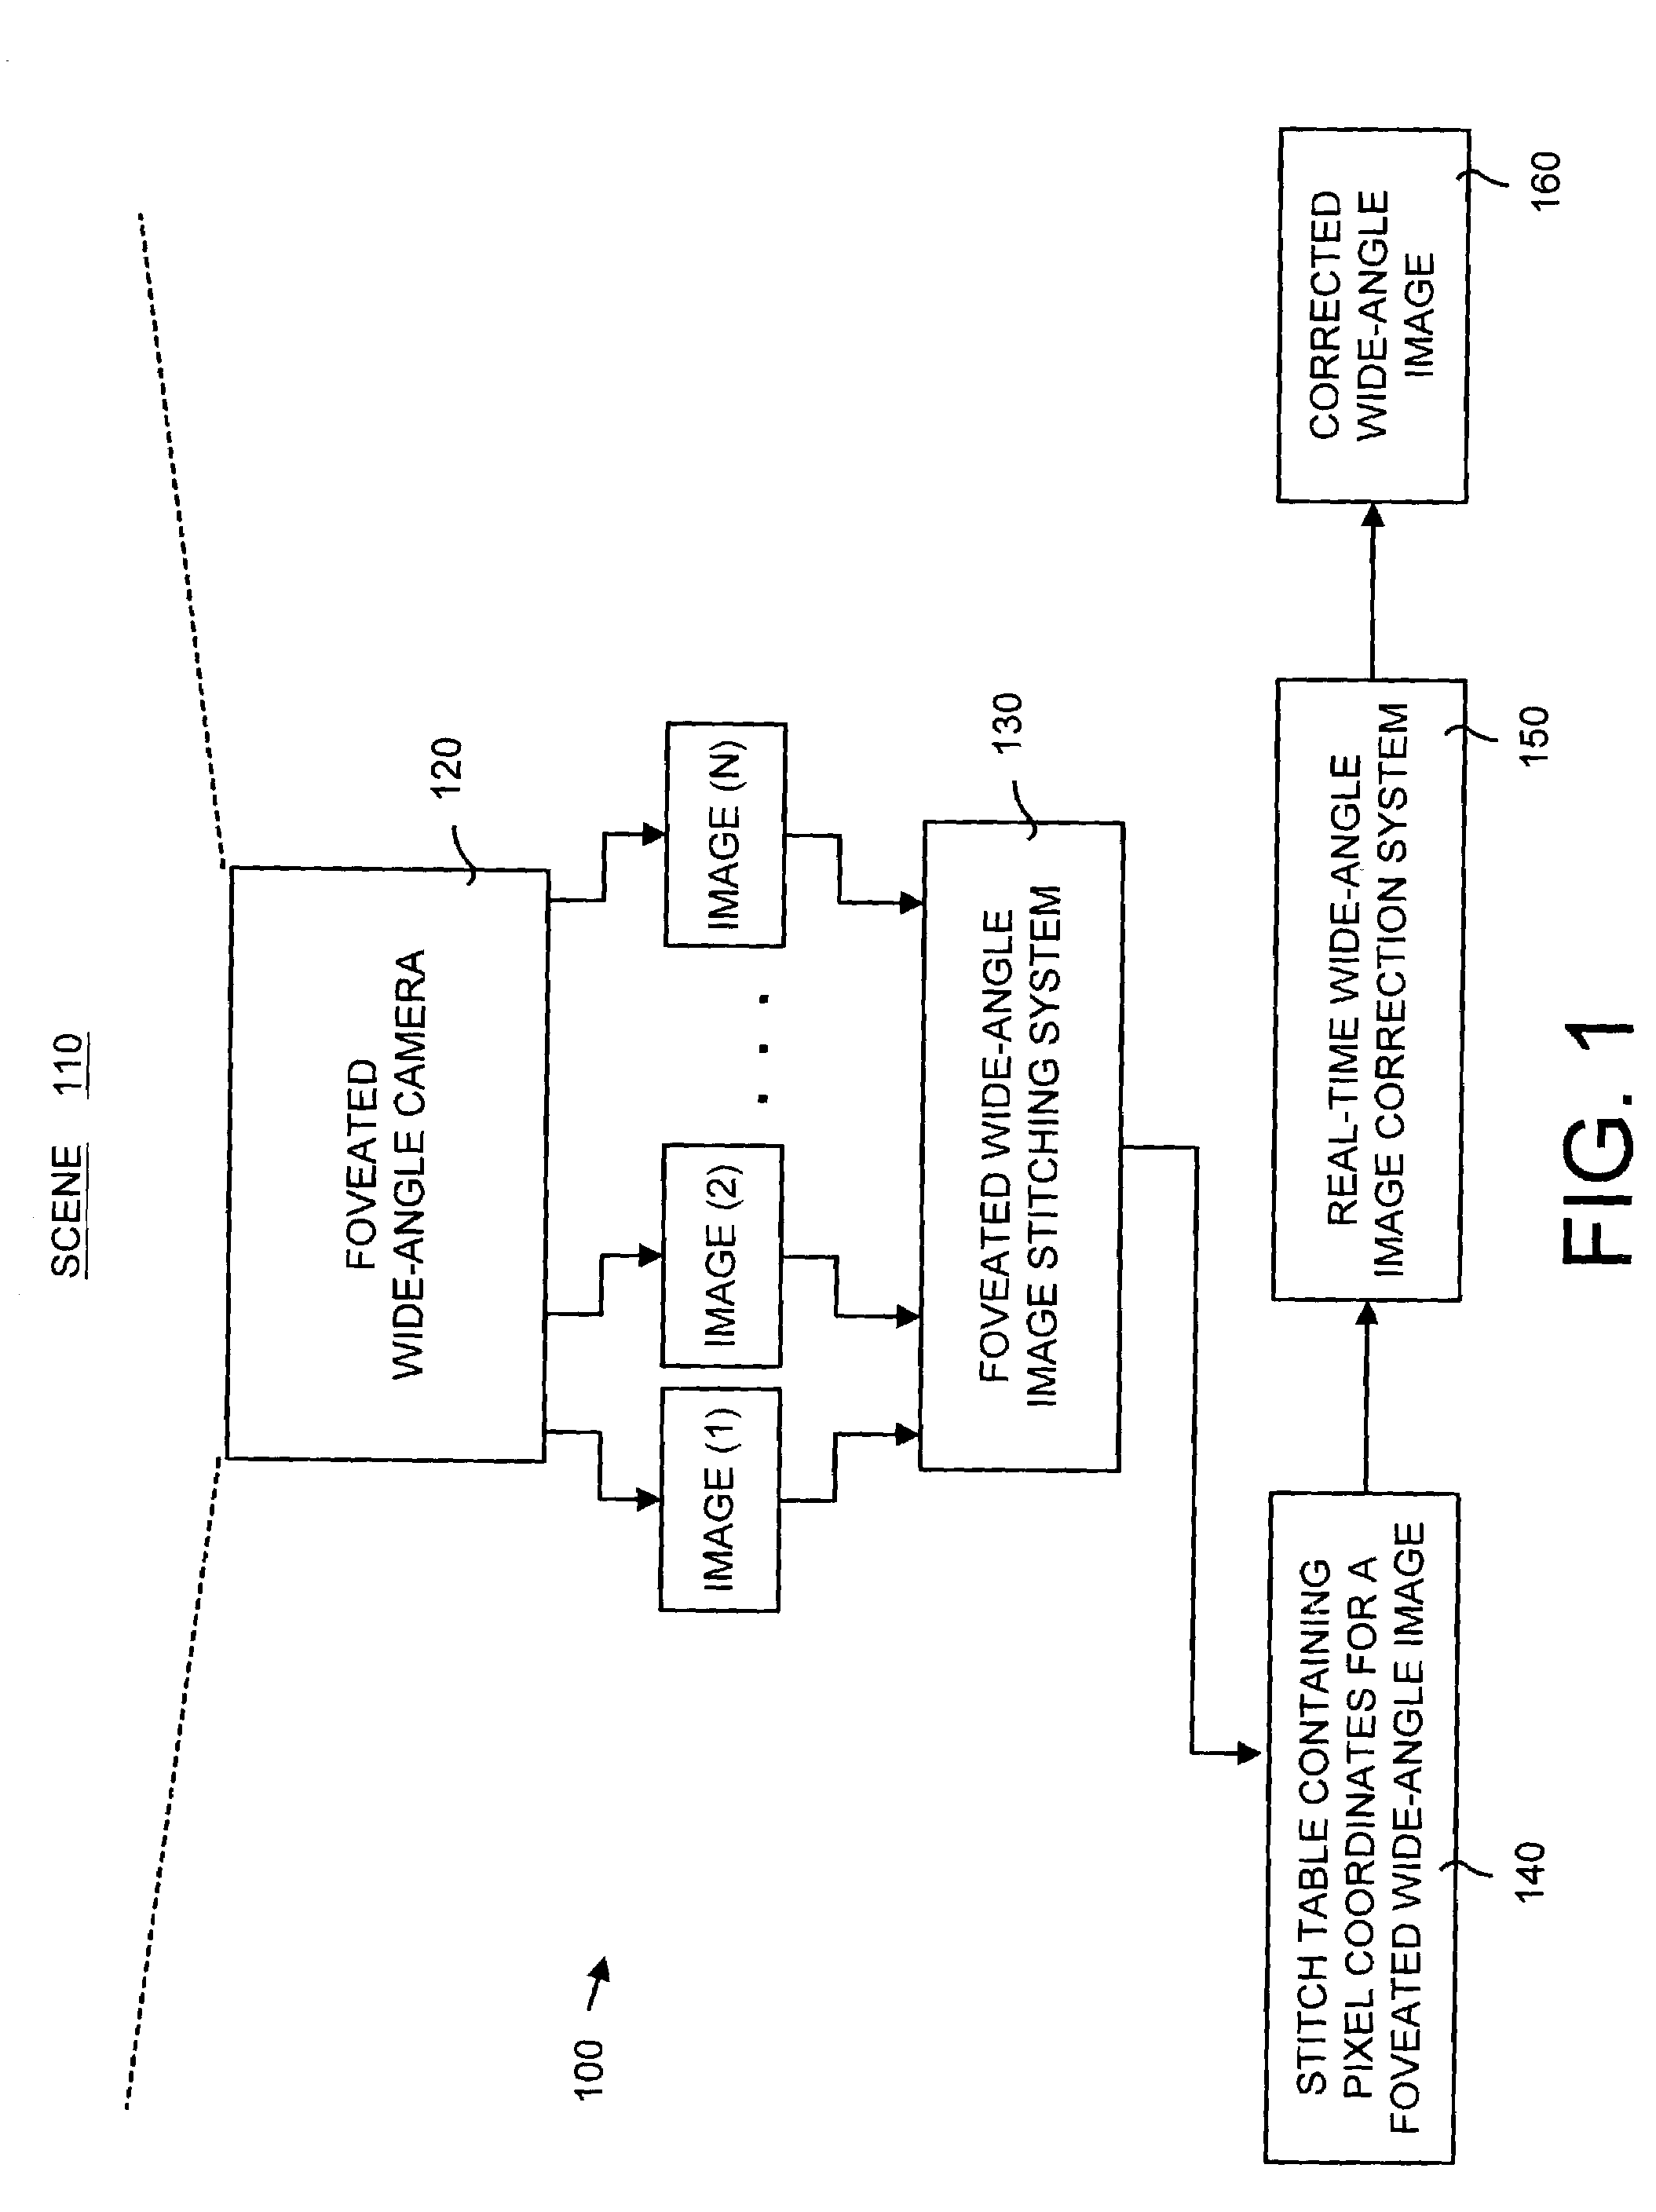 Foveated wide-angle imaging system and method for capturing and viewing wide-angle images in real time